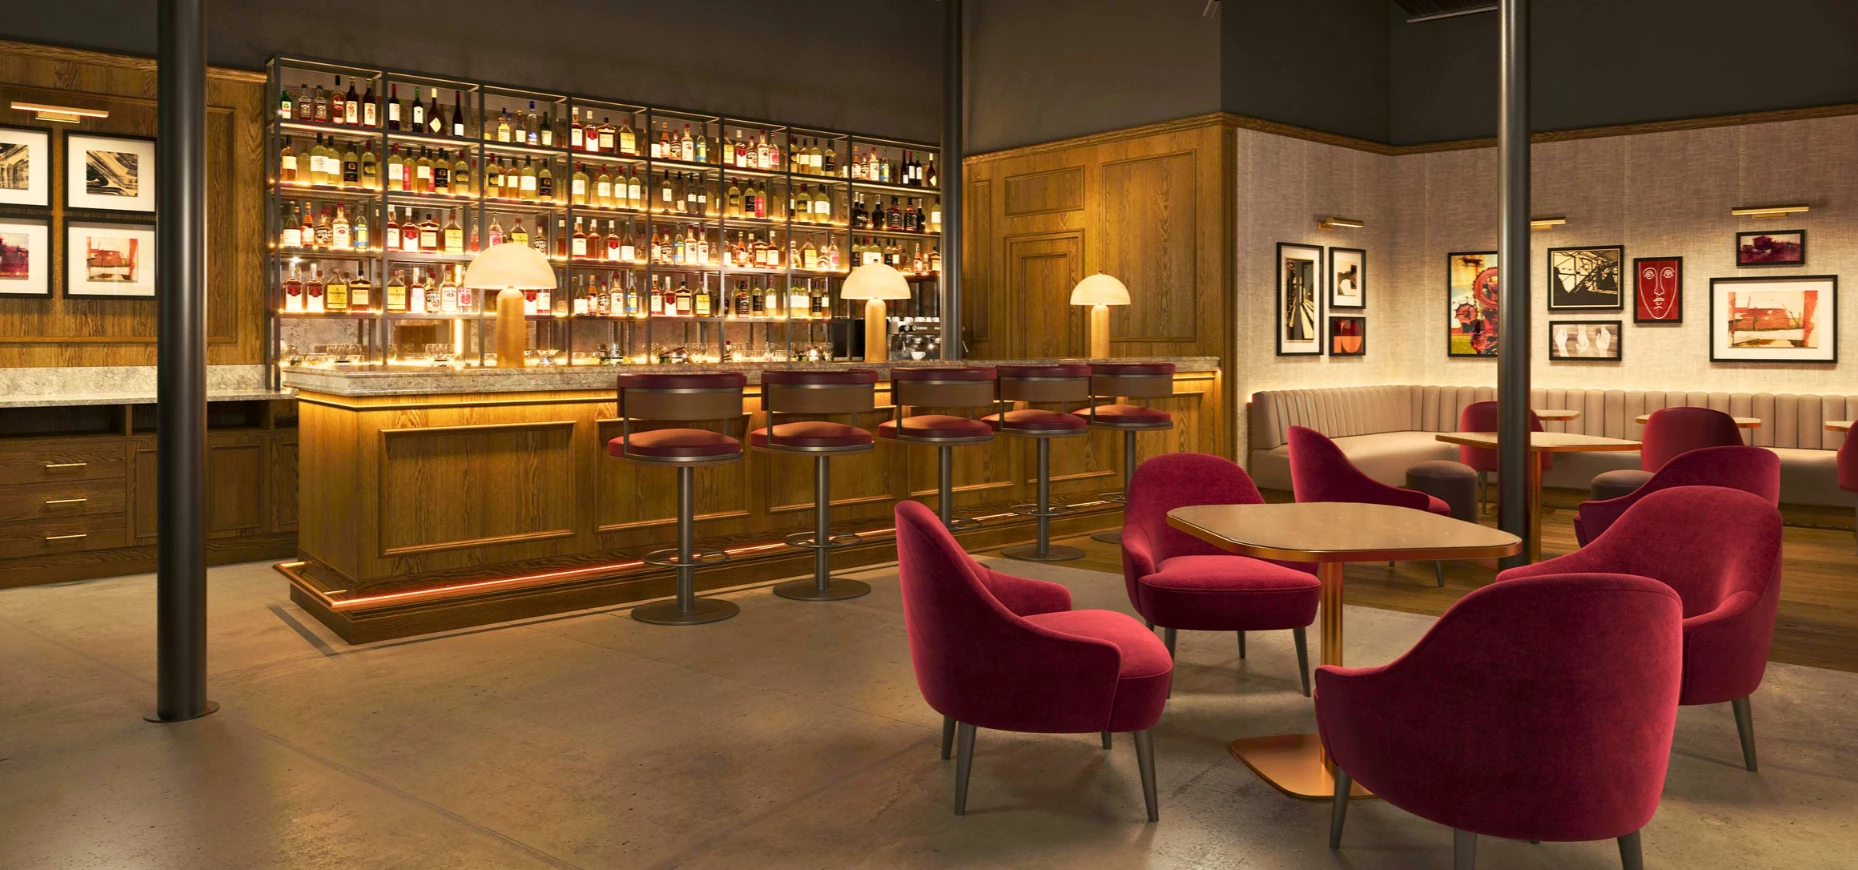 An artist's rendition of the new bar area planned for Hotel Indigo and Staybridge Suites in Dundee.